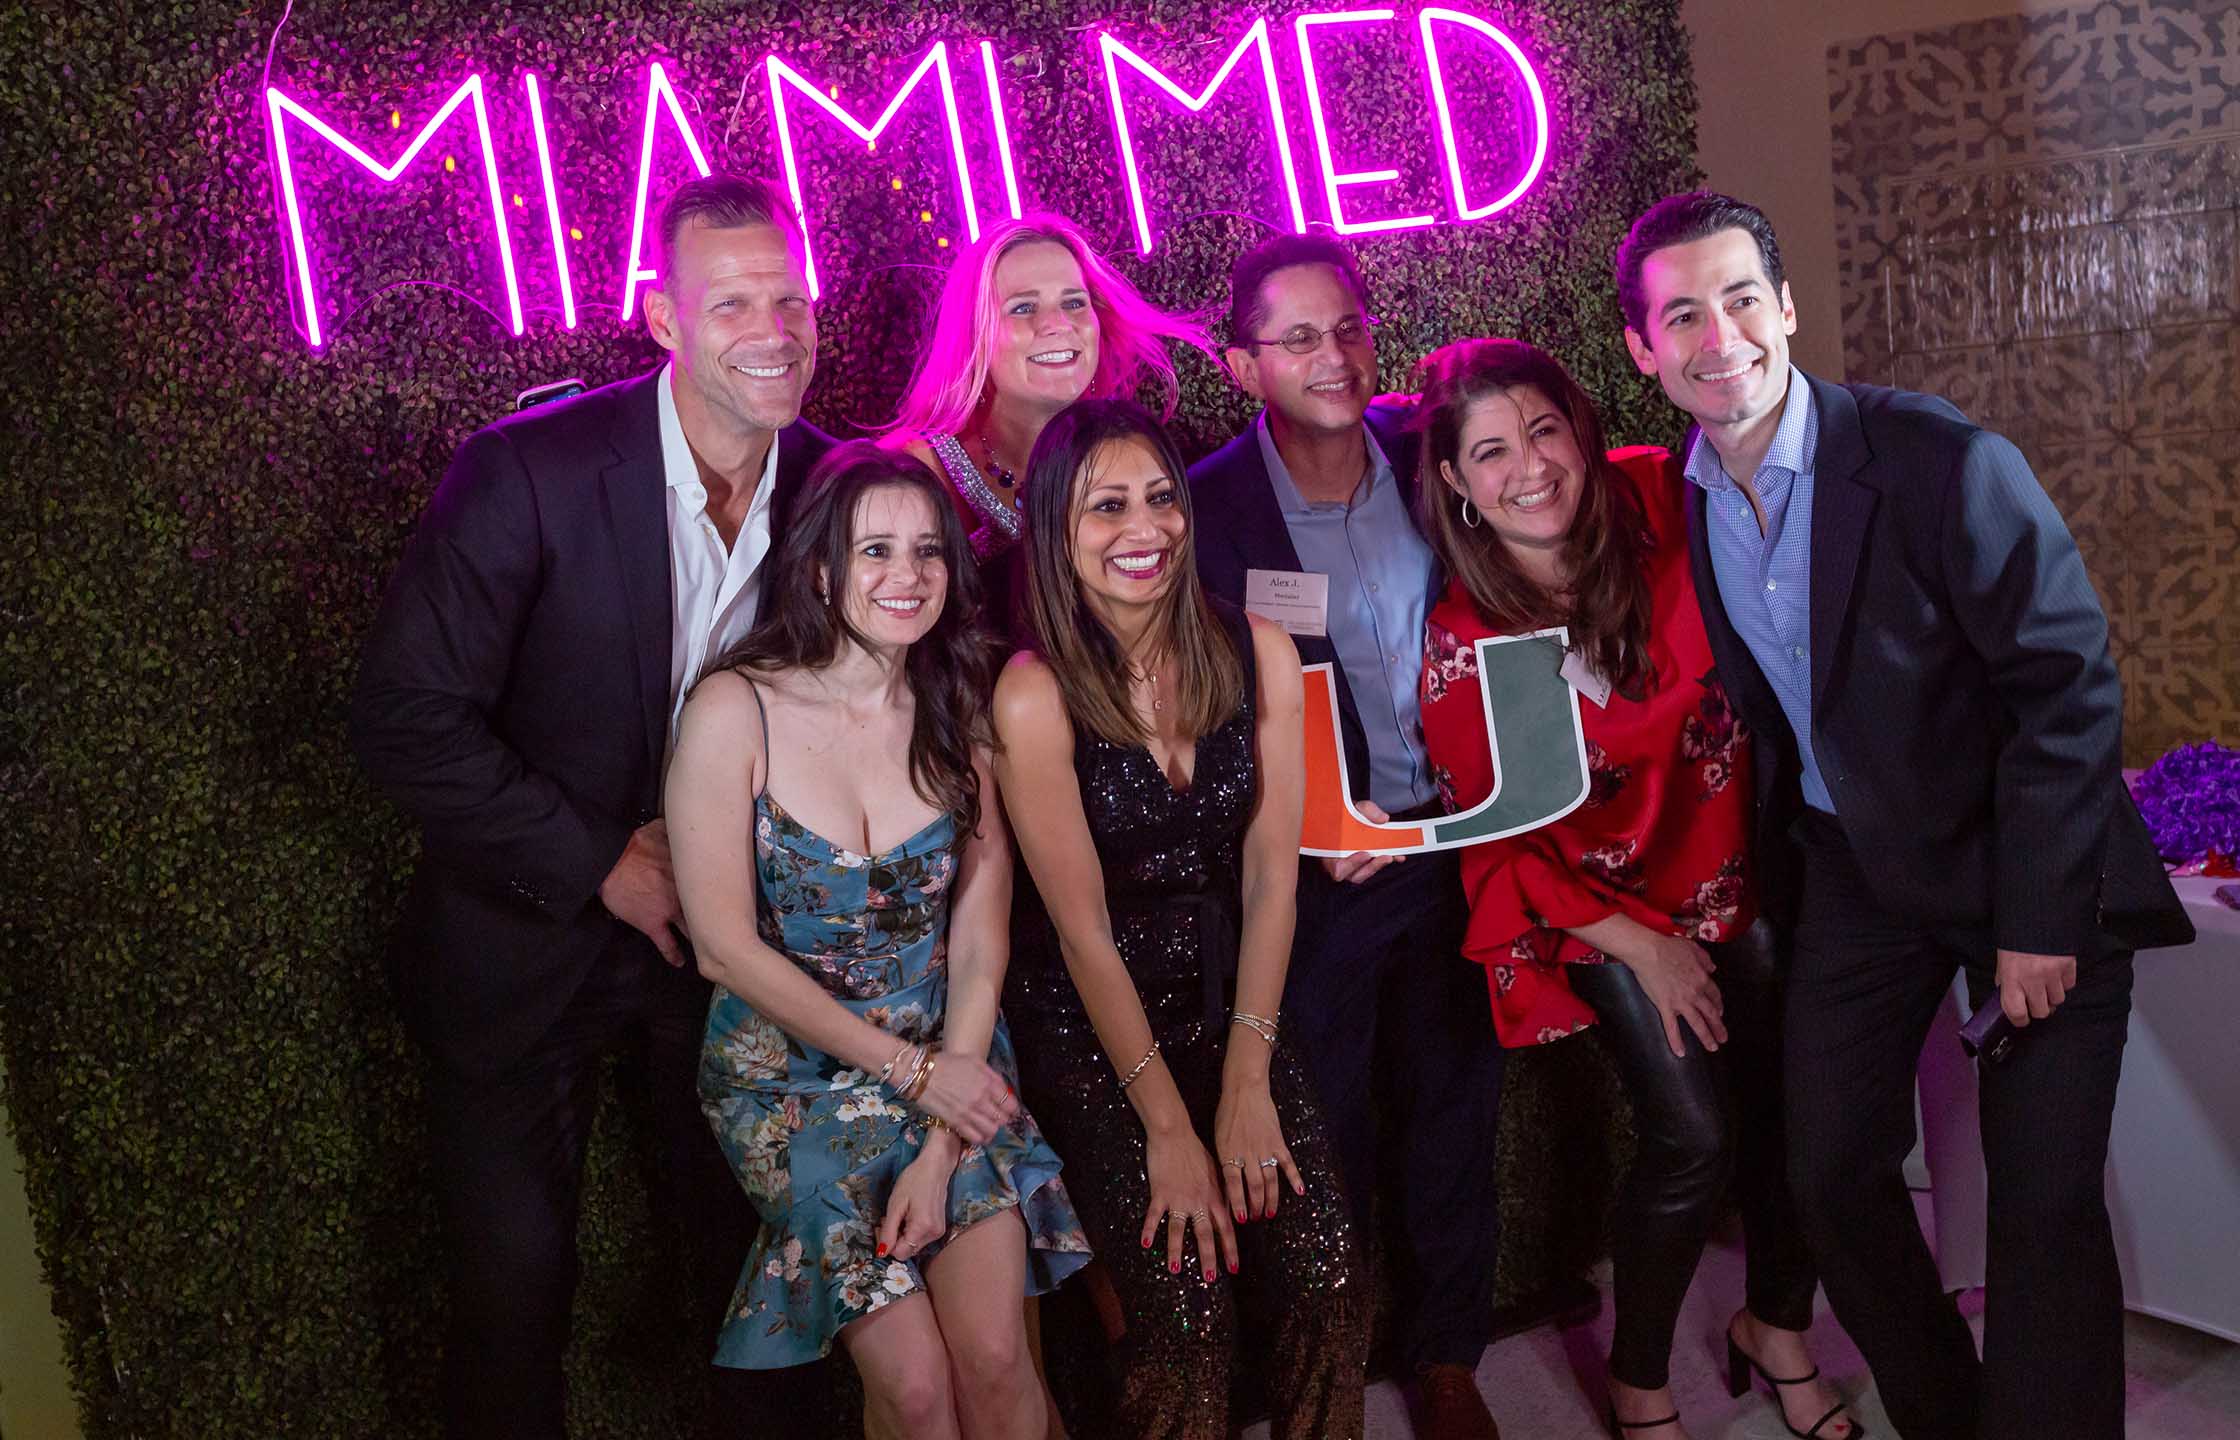 Miami Med members pose for a group photo